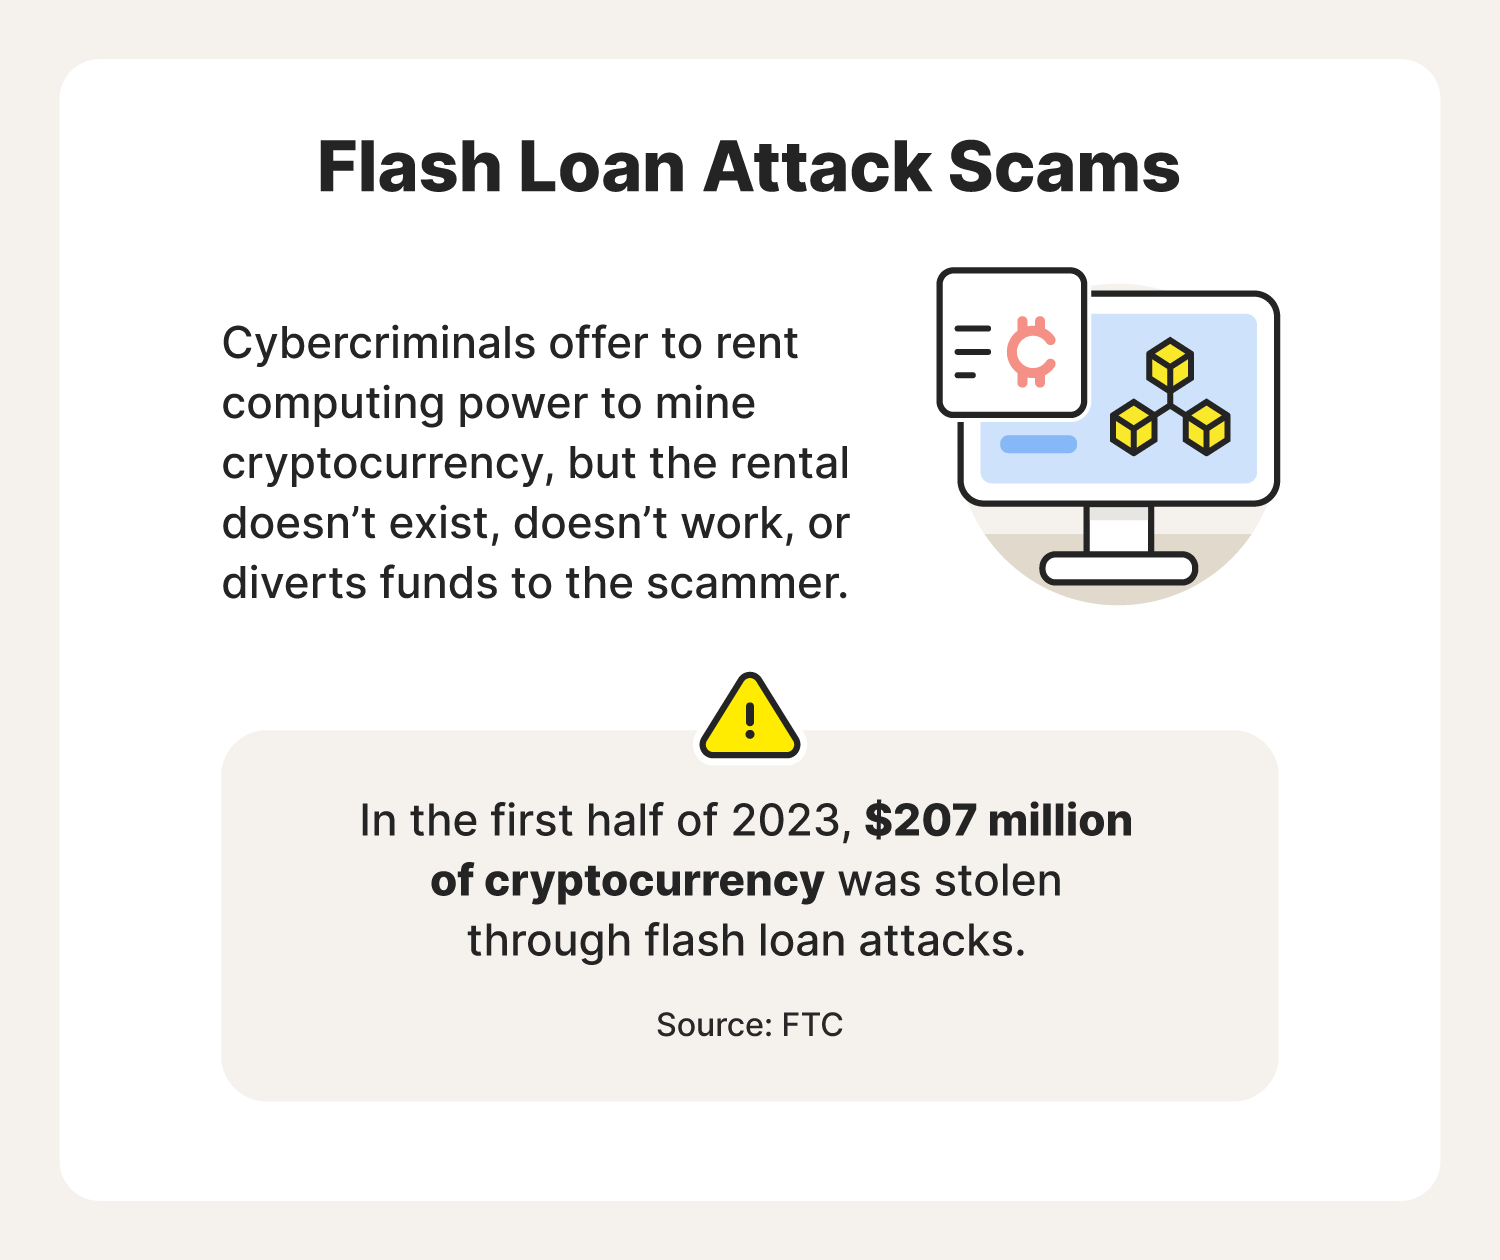 Illustrated chart defining flash loan attack scams and how much money has been stolen through them.